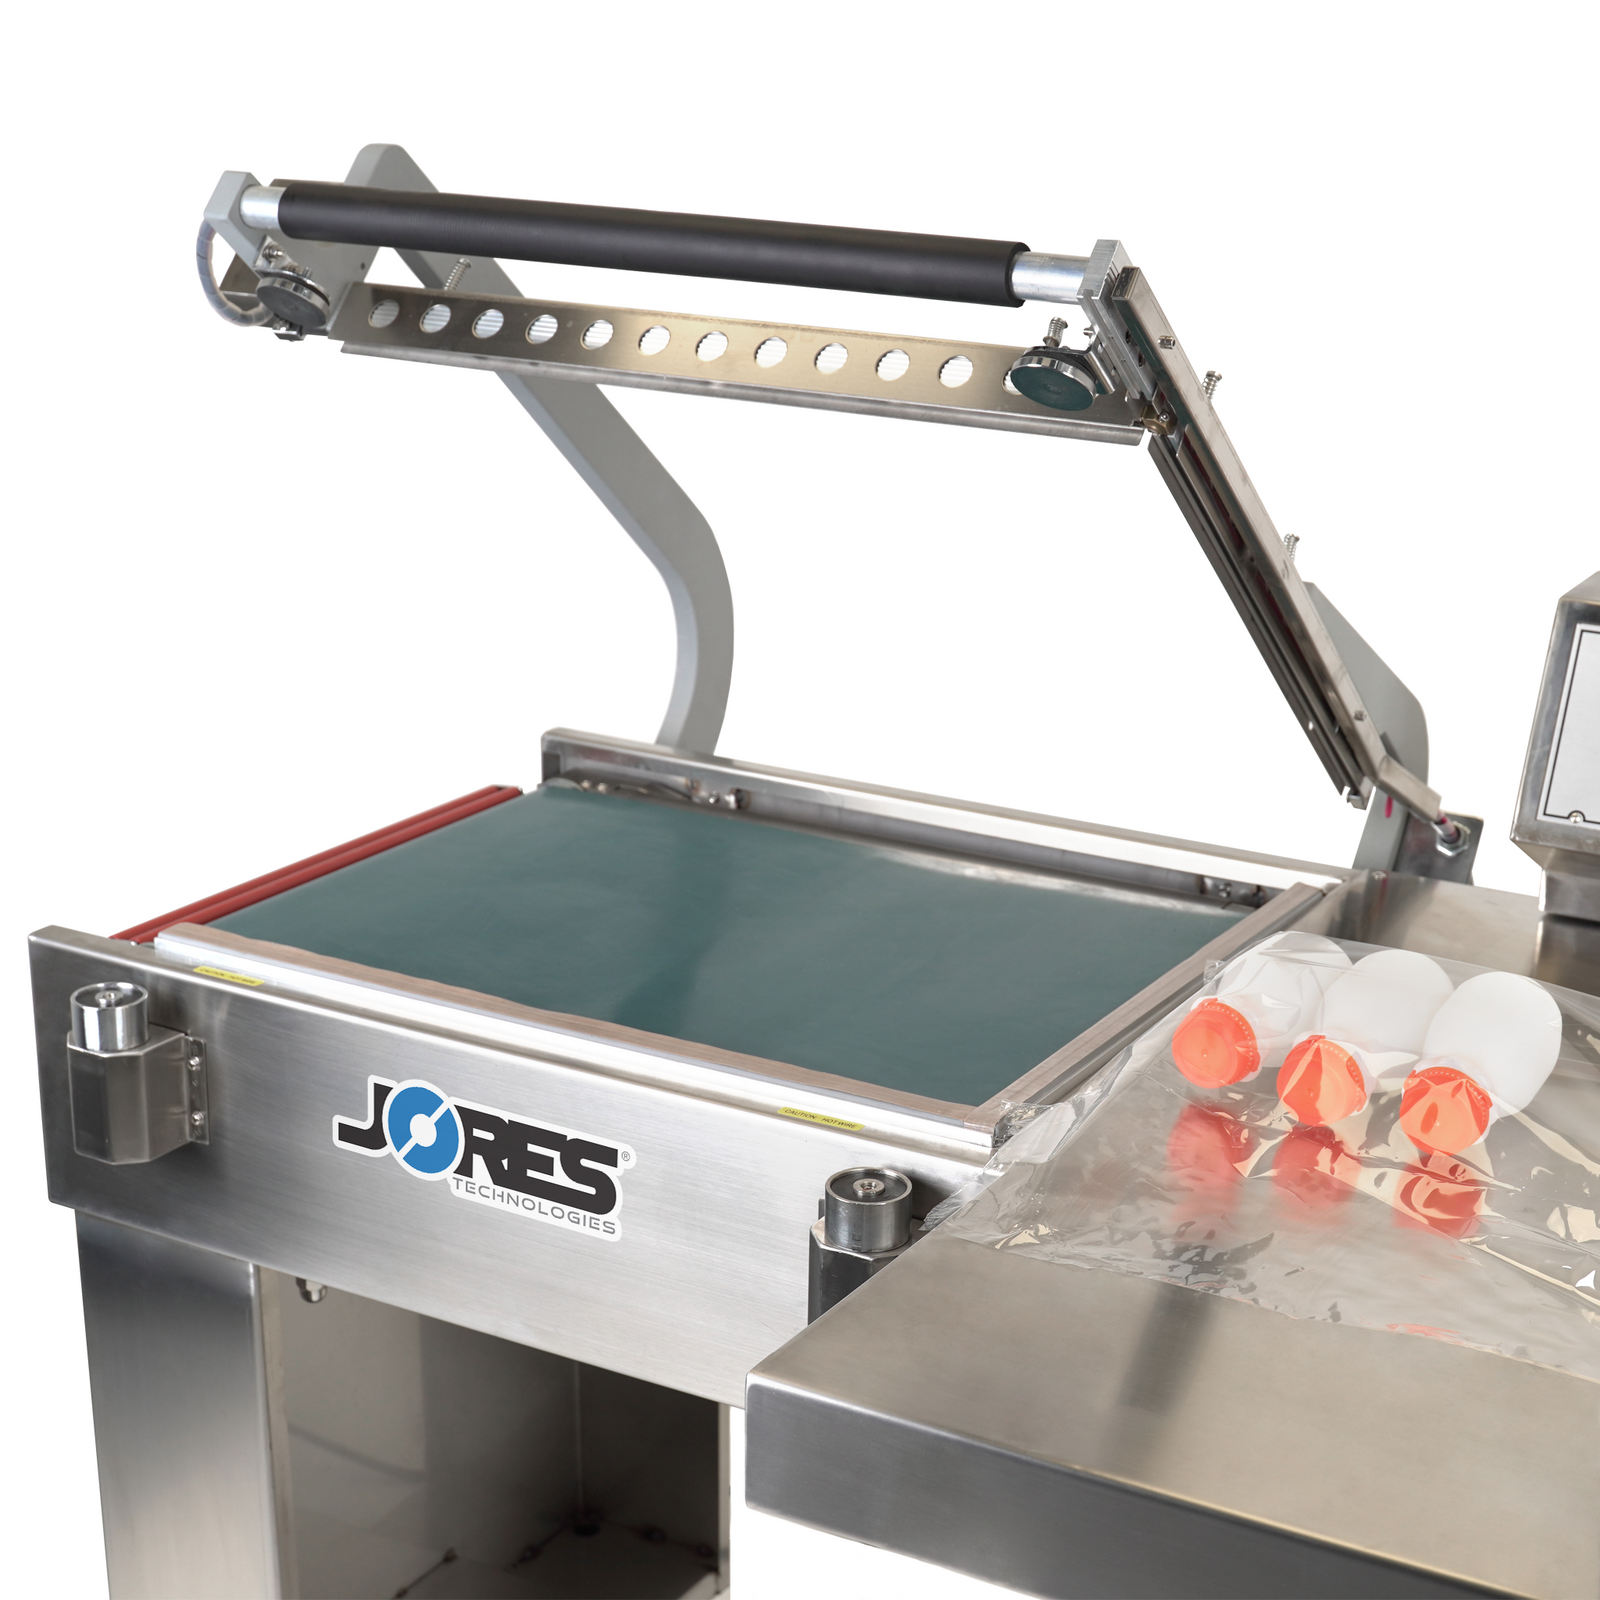  Stainless steel semi-automatic L bar heat sealer with conveyor to pack bundles of medium size plastic containers.